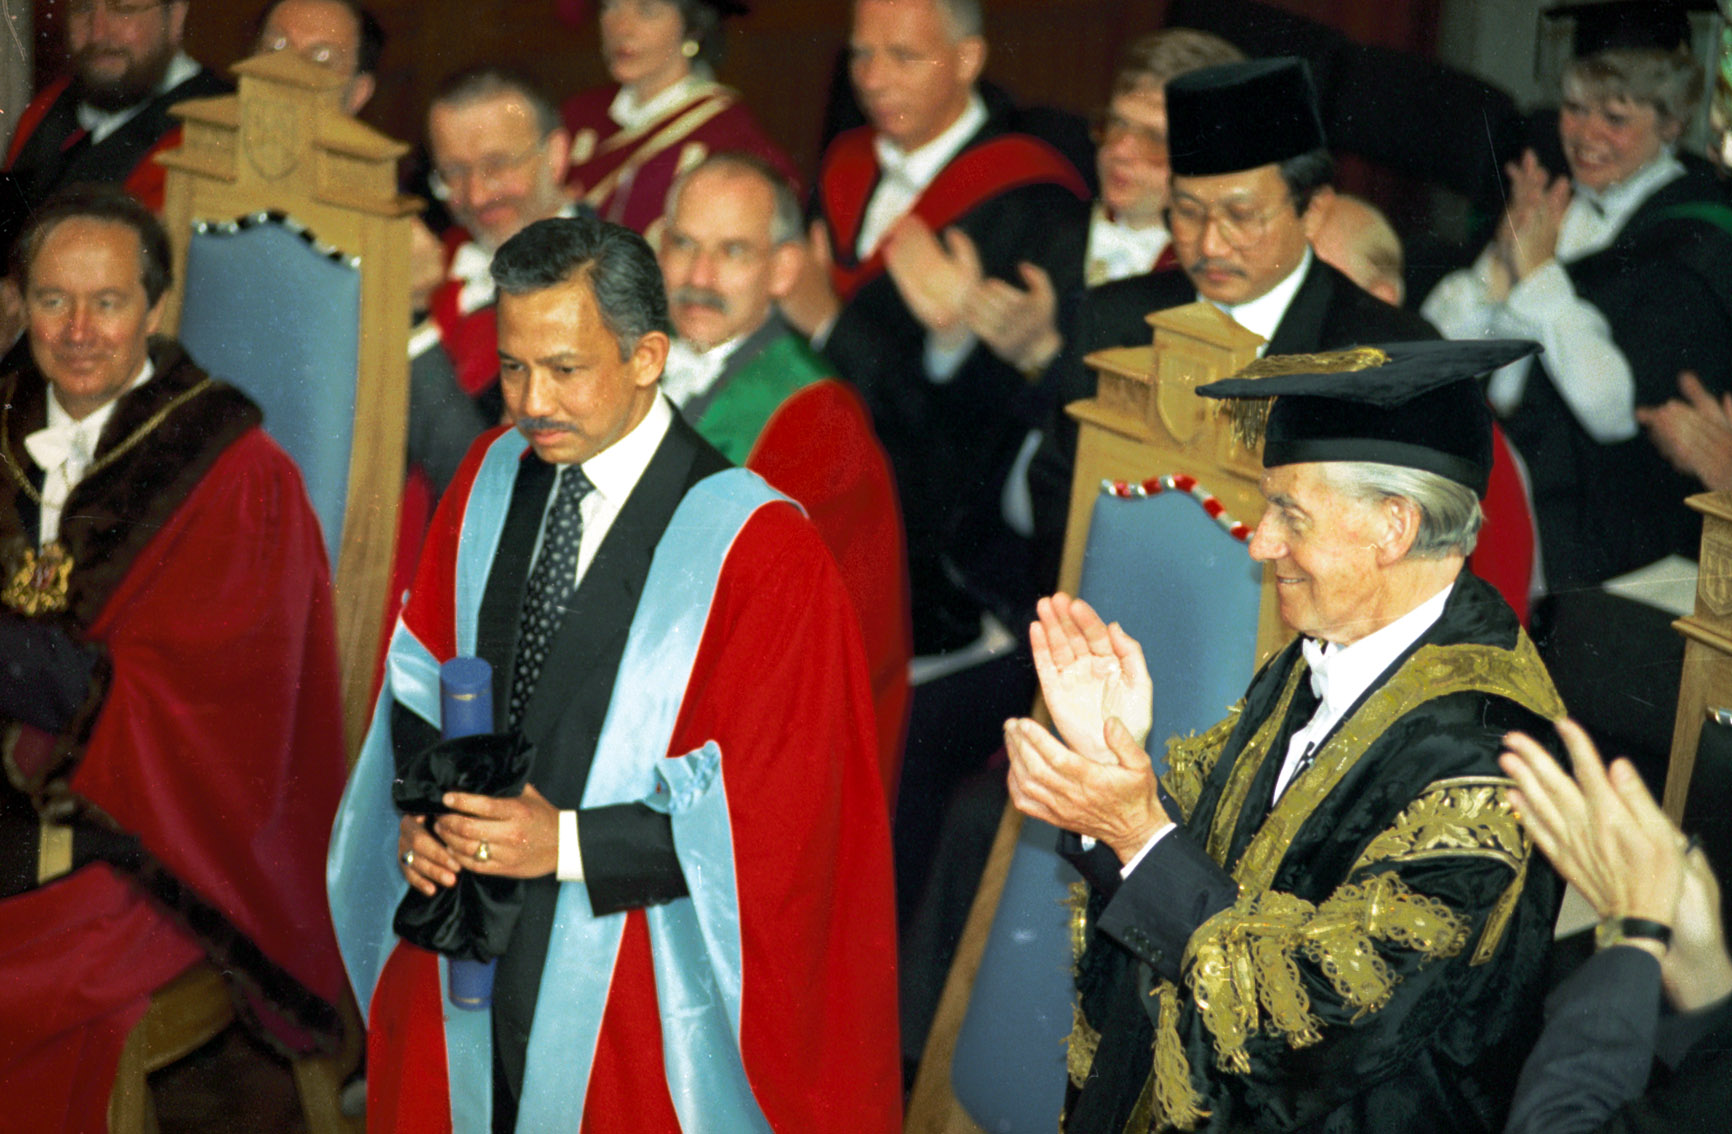 The Sultan of Brunei, receives an Honorary Doctor of Law degree at an Aberdeen University graduation ceremony in 1995.